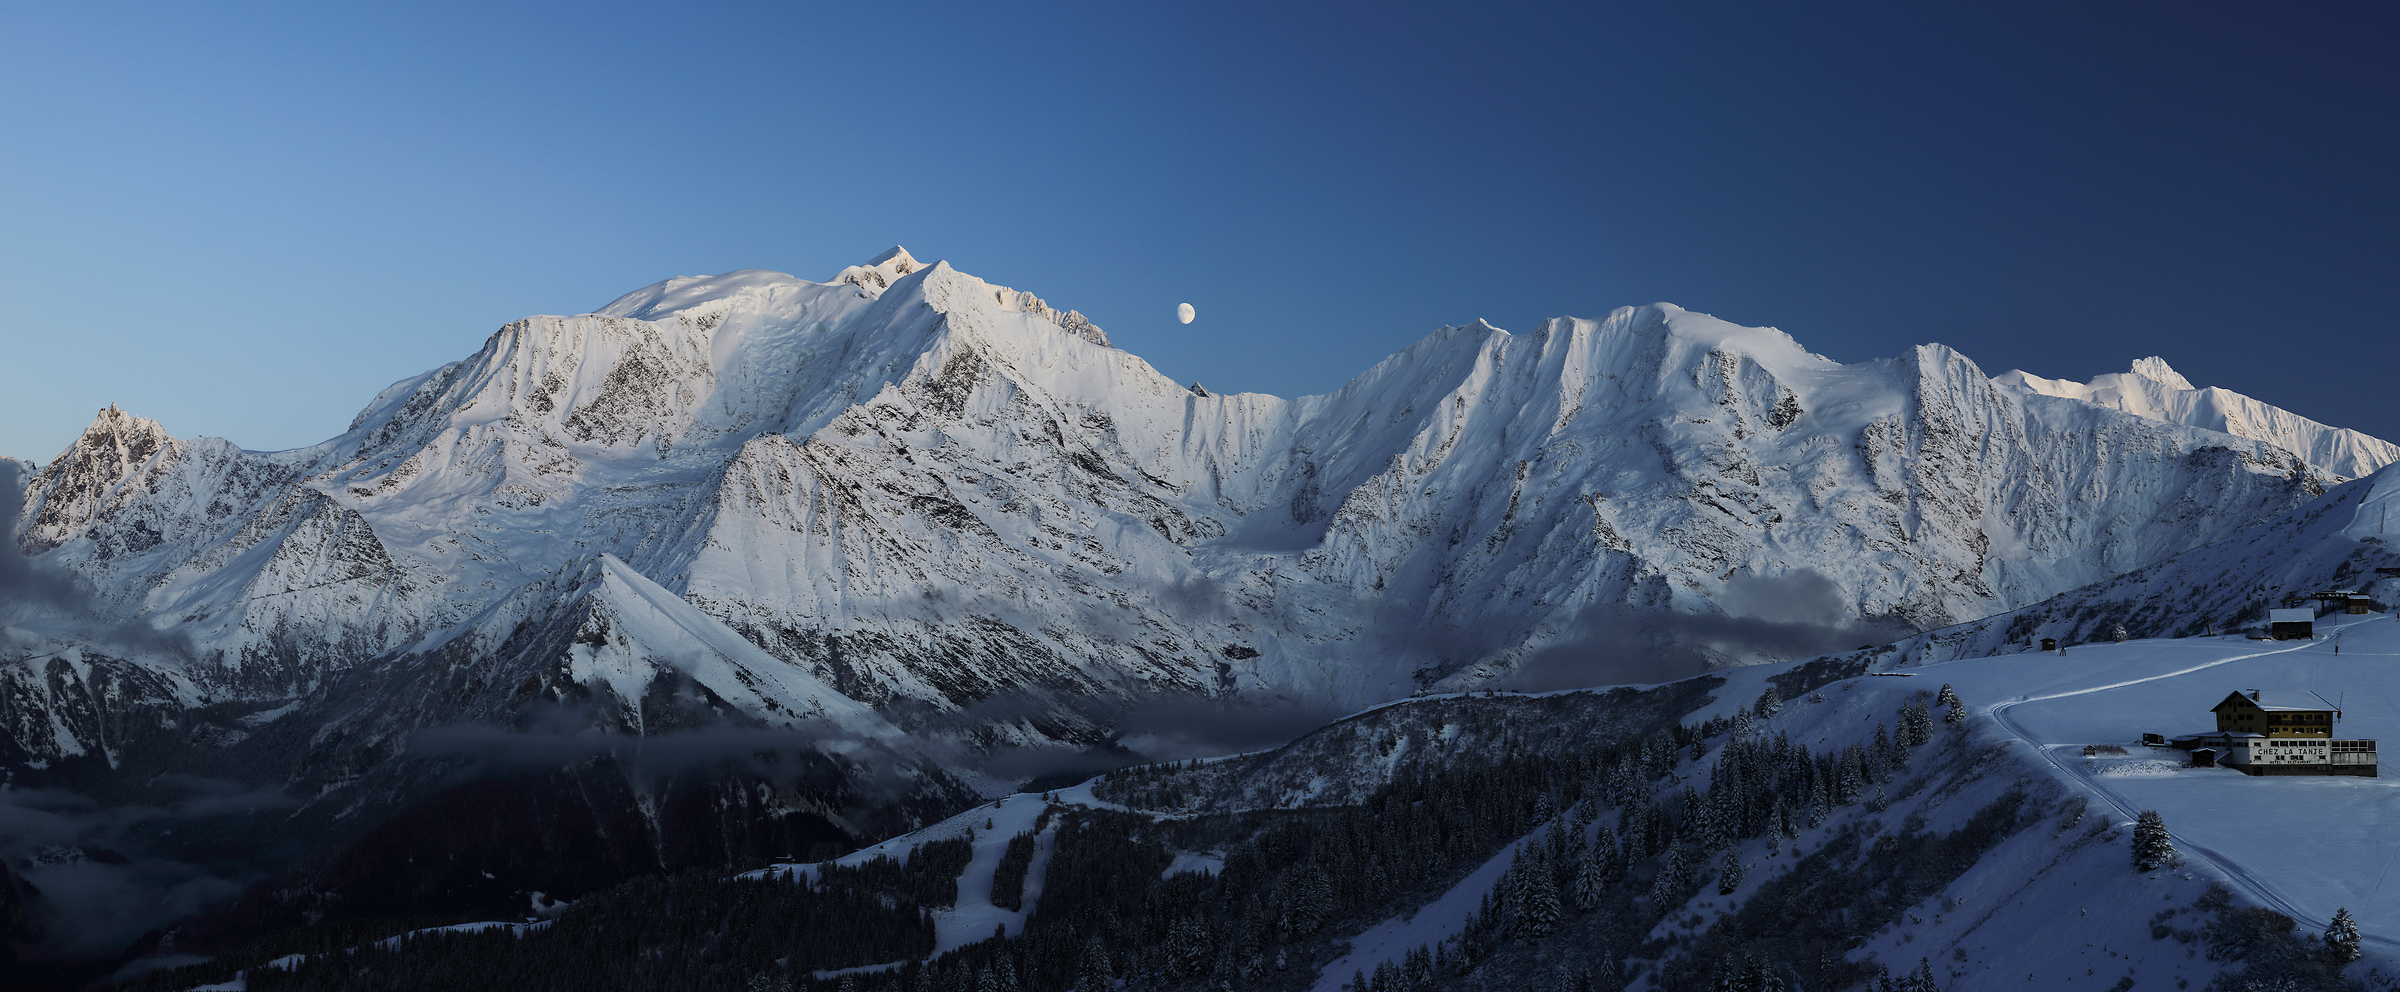 148 megapixels! A very high resolution, large-format VAST photo print of a mountain range at night with the moon; landscape photograph created by Alexandre Deschaumes in Mont Blanc Massif, Saint-Gervais-les-Bains, France.